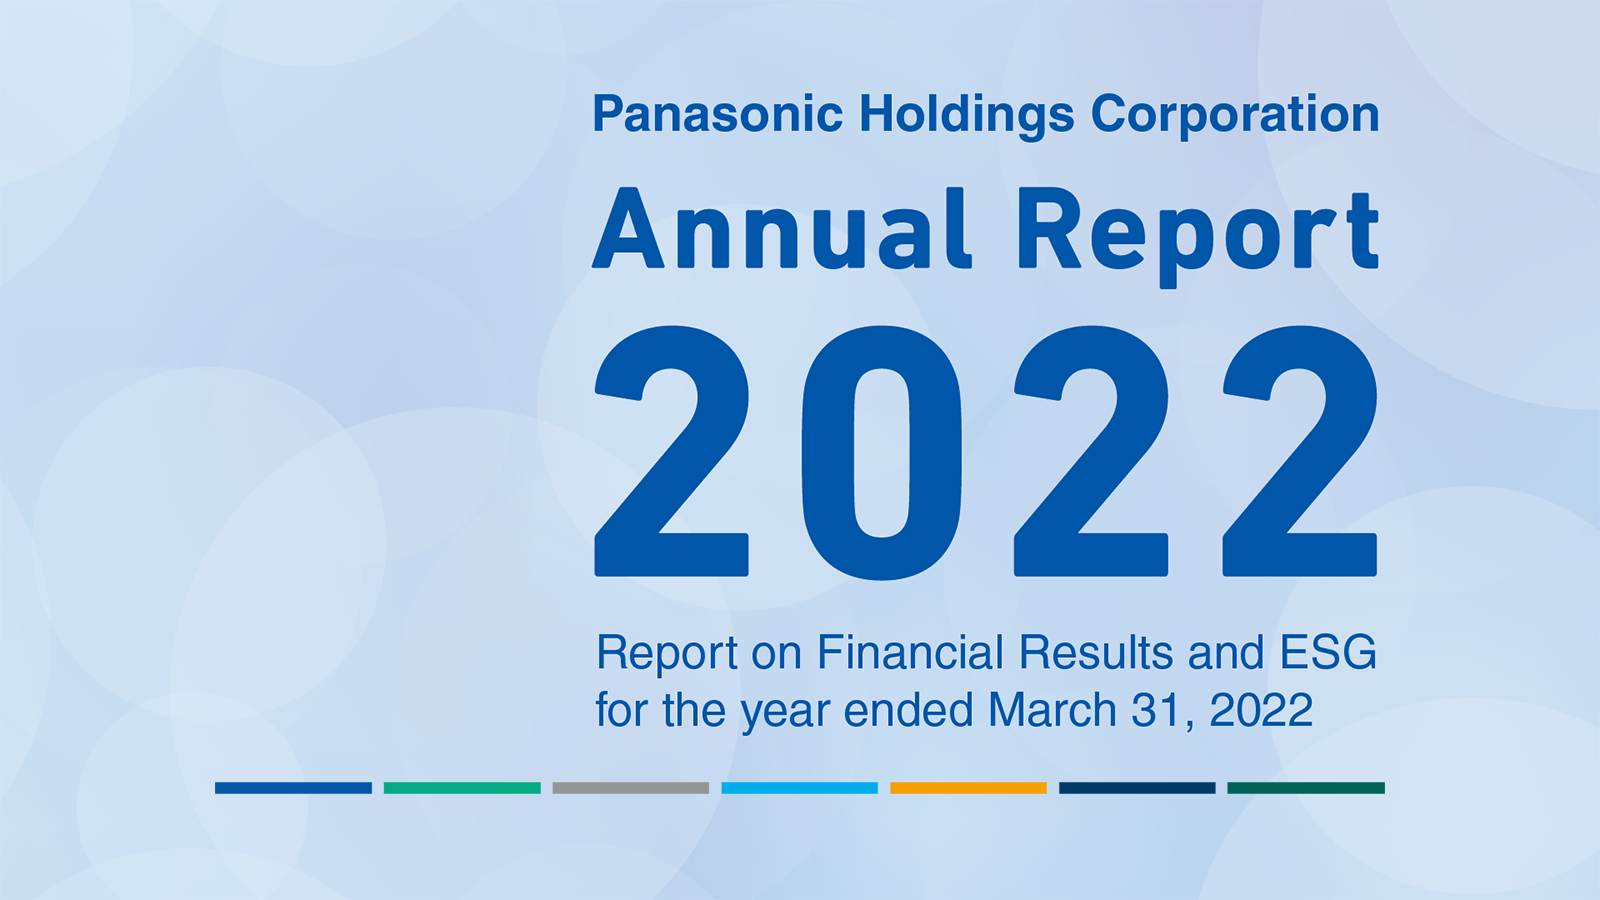 “Annual Report 2022” of Panasonic Holdings Published